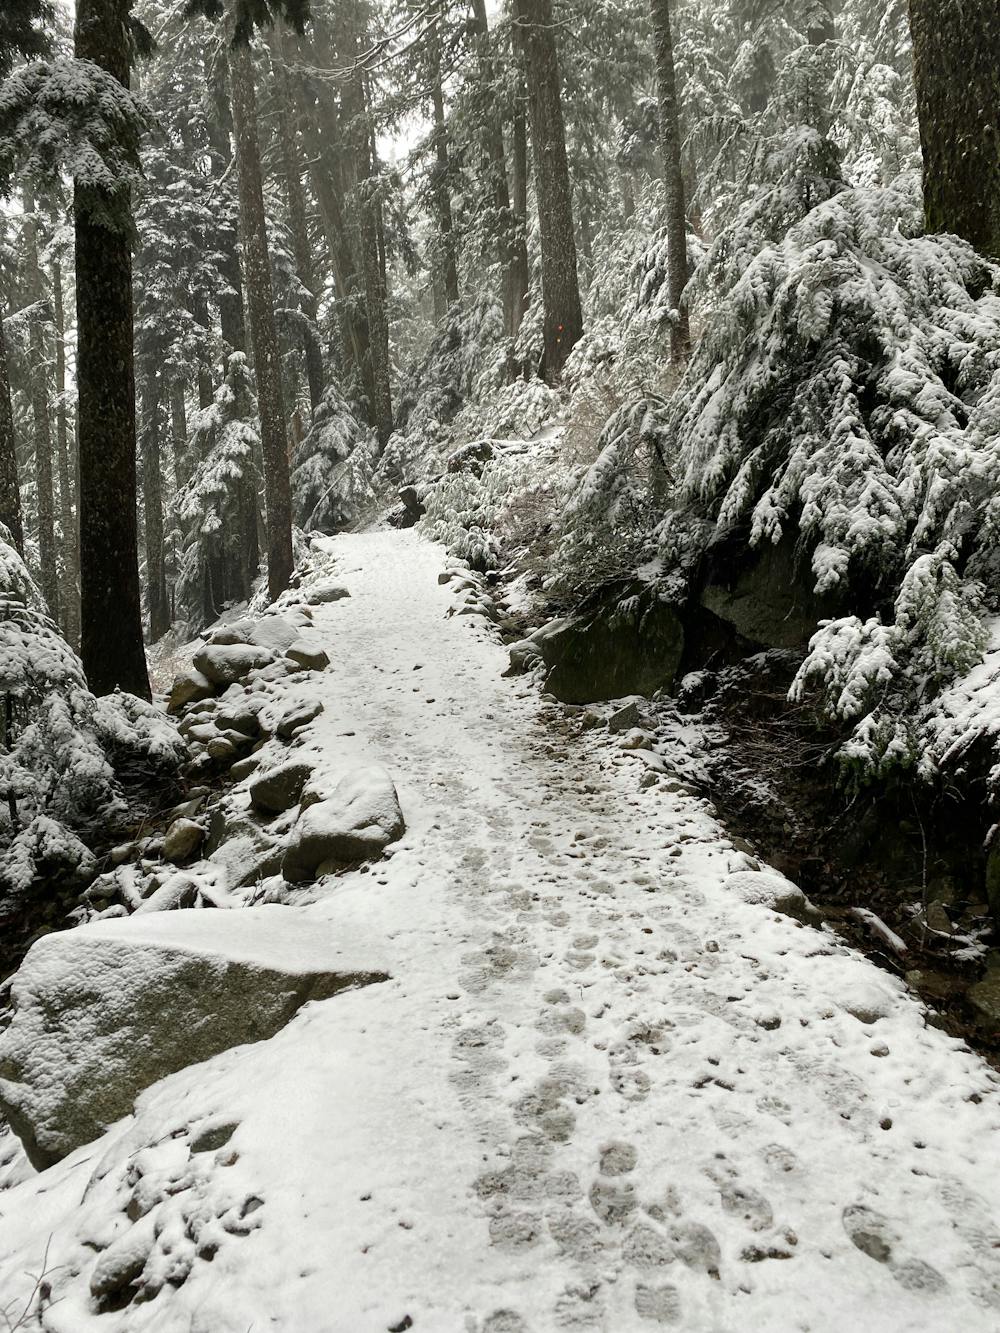 Trail in early season conditions